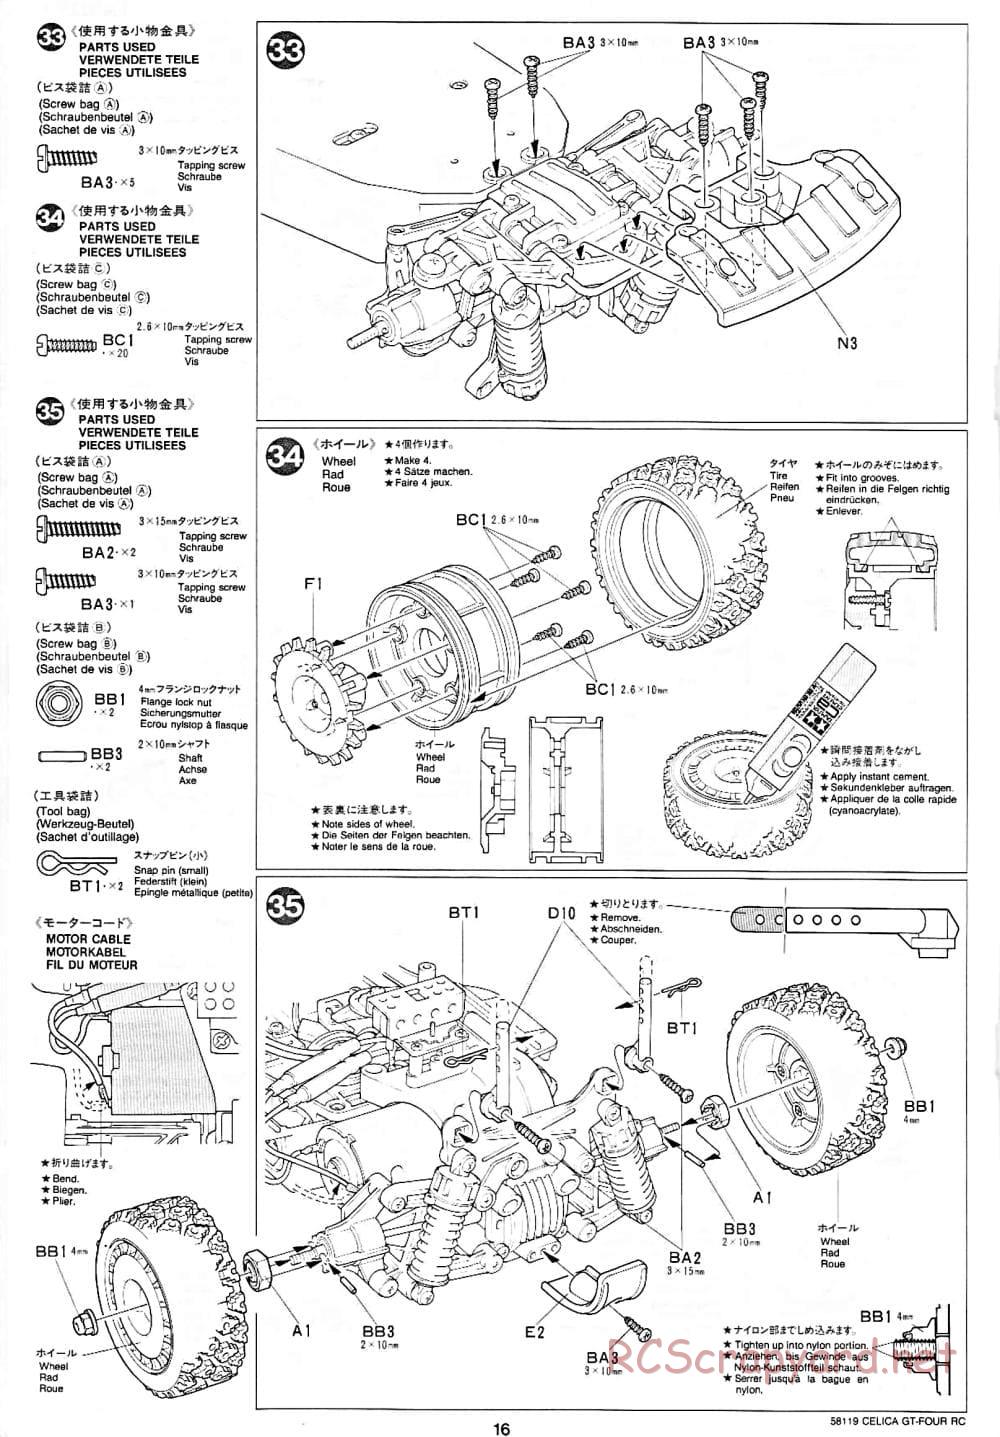 Tamiya - Toyota Celica GT-Four RC - TA-01 Chassis - Manual - Page 16